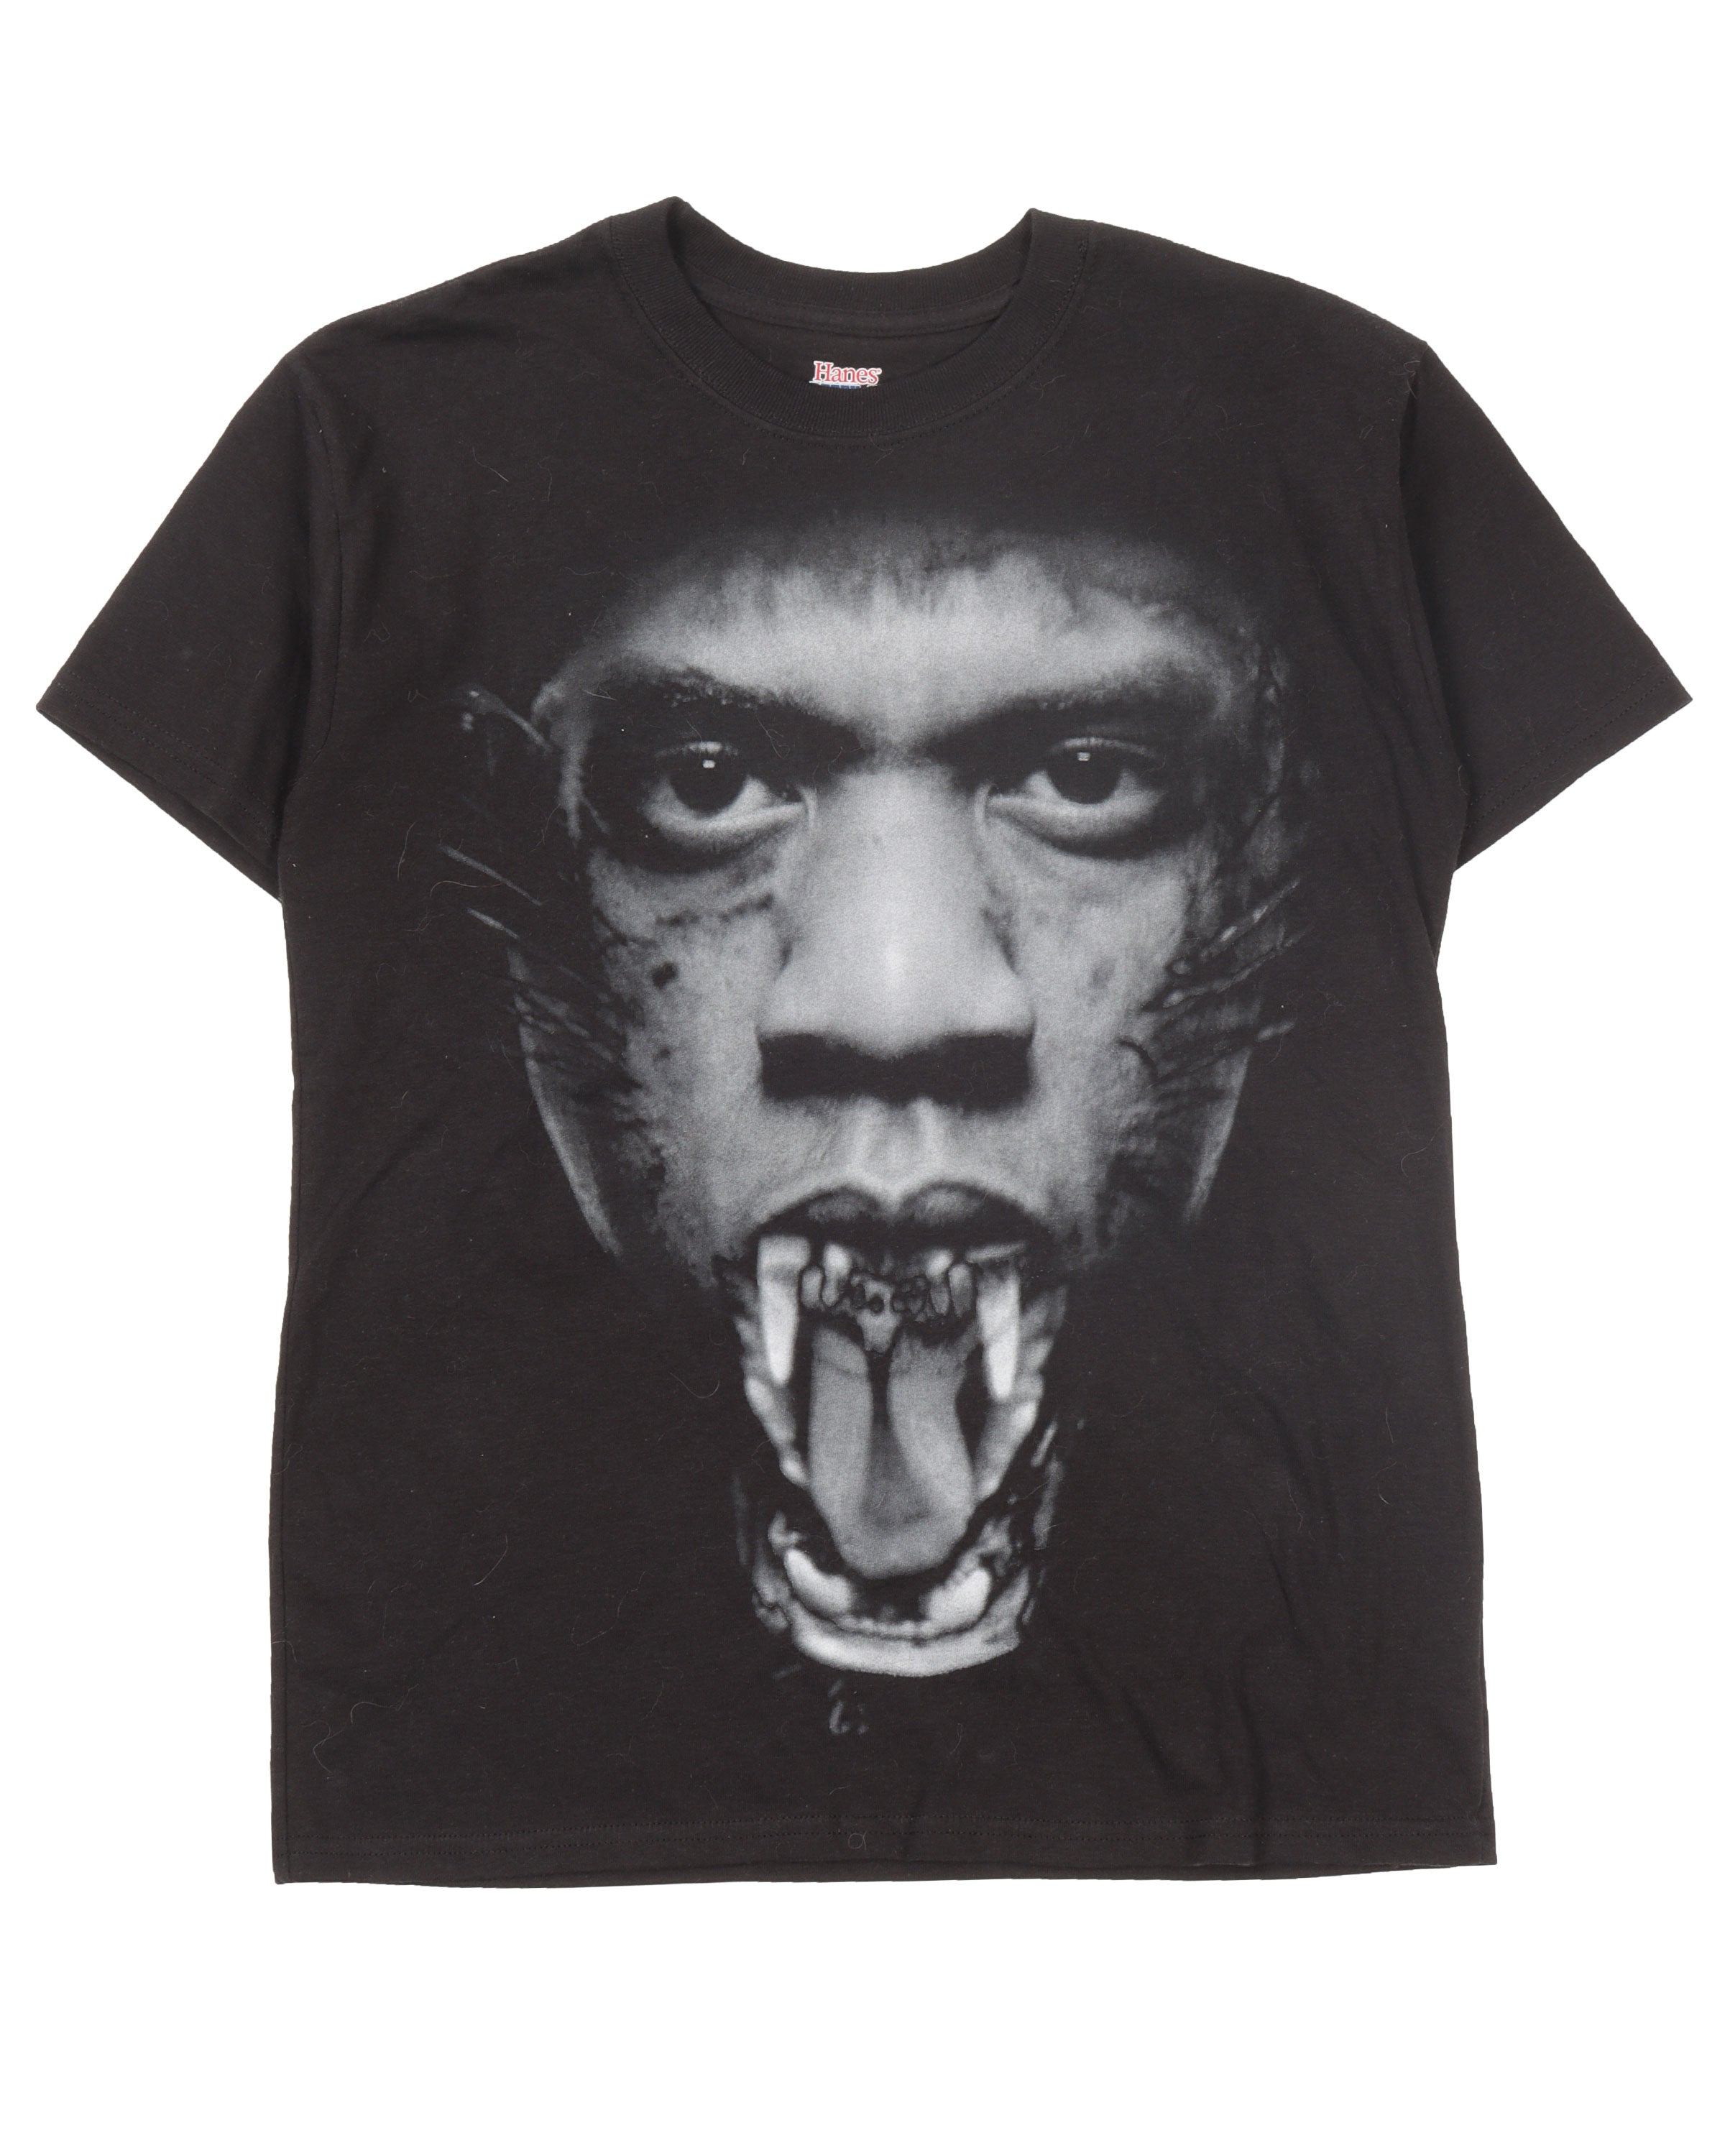 Jay-Z Kanye West Watch The Throne Tour T-Shirt